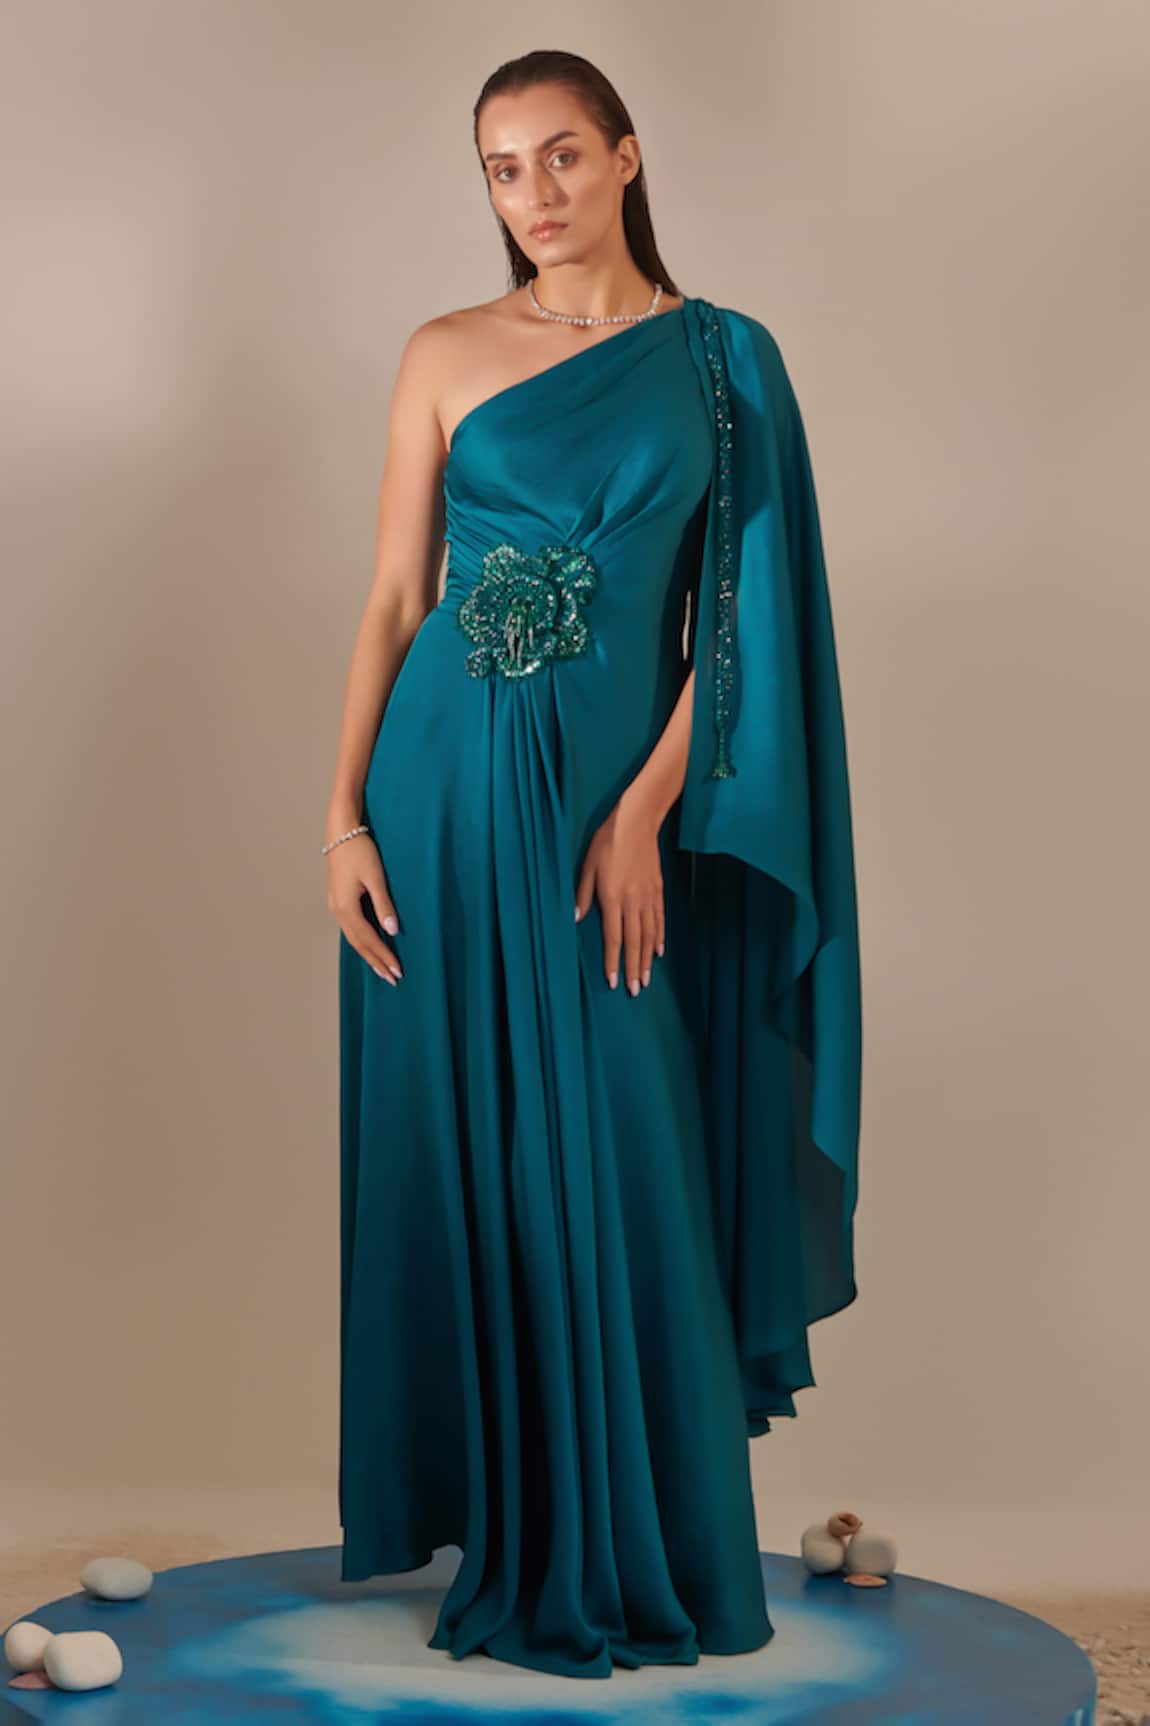 One Knot One Embellished One Shoulder Gown